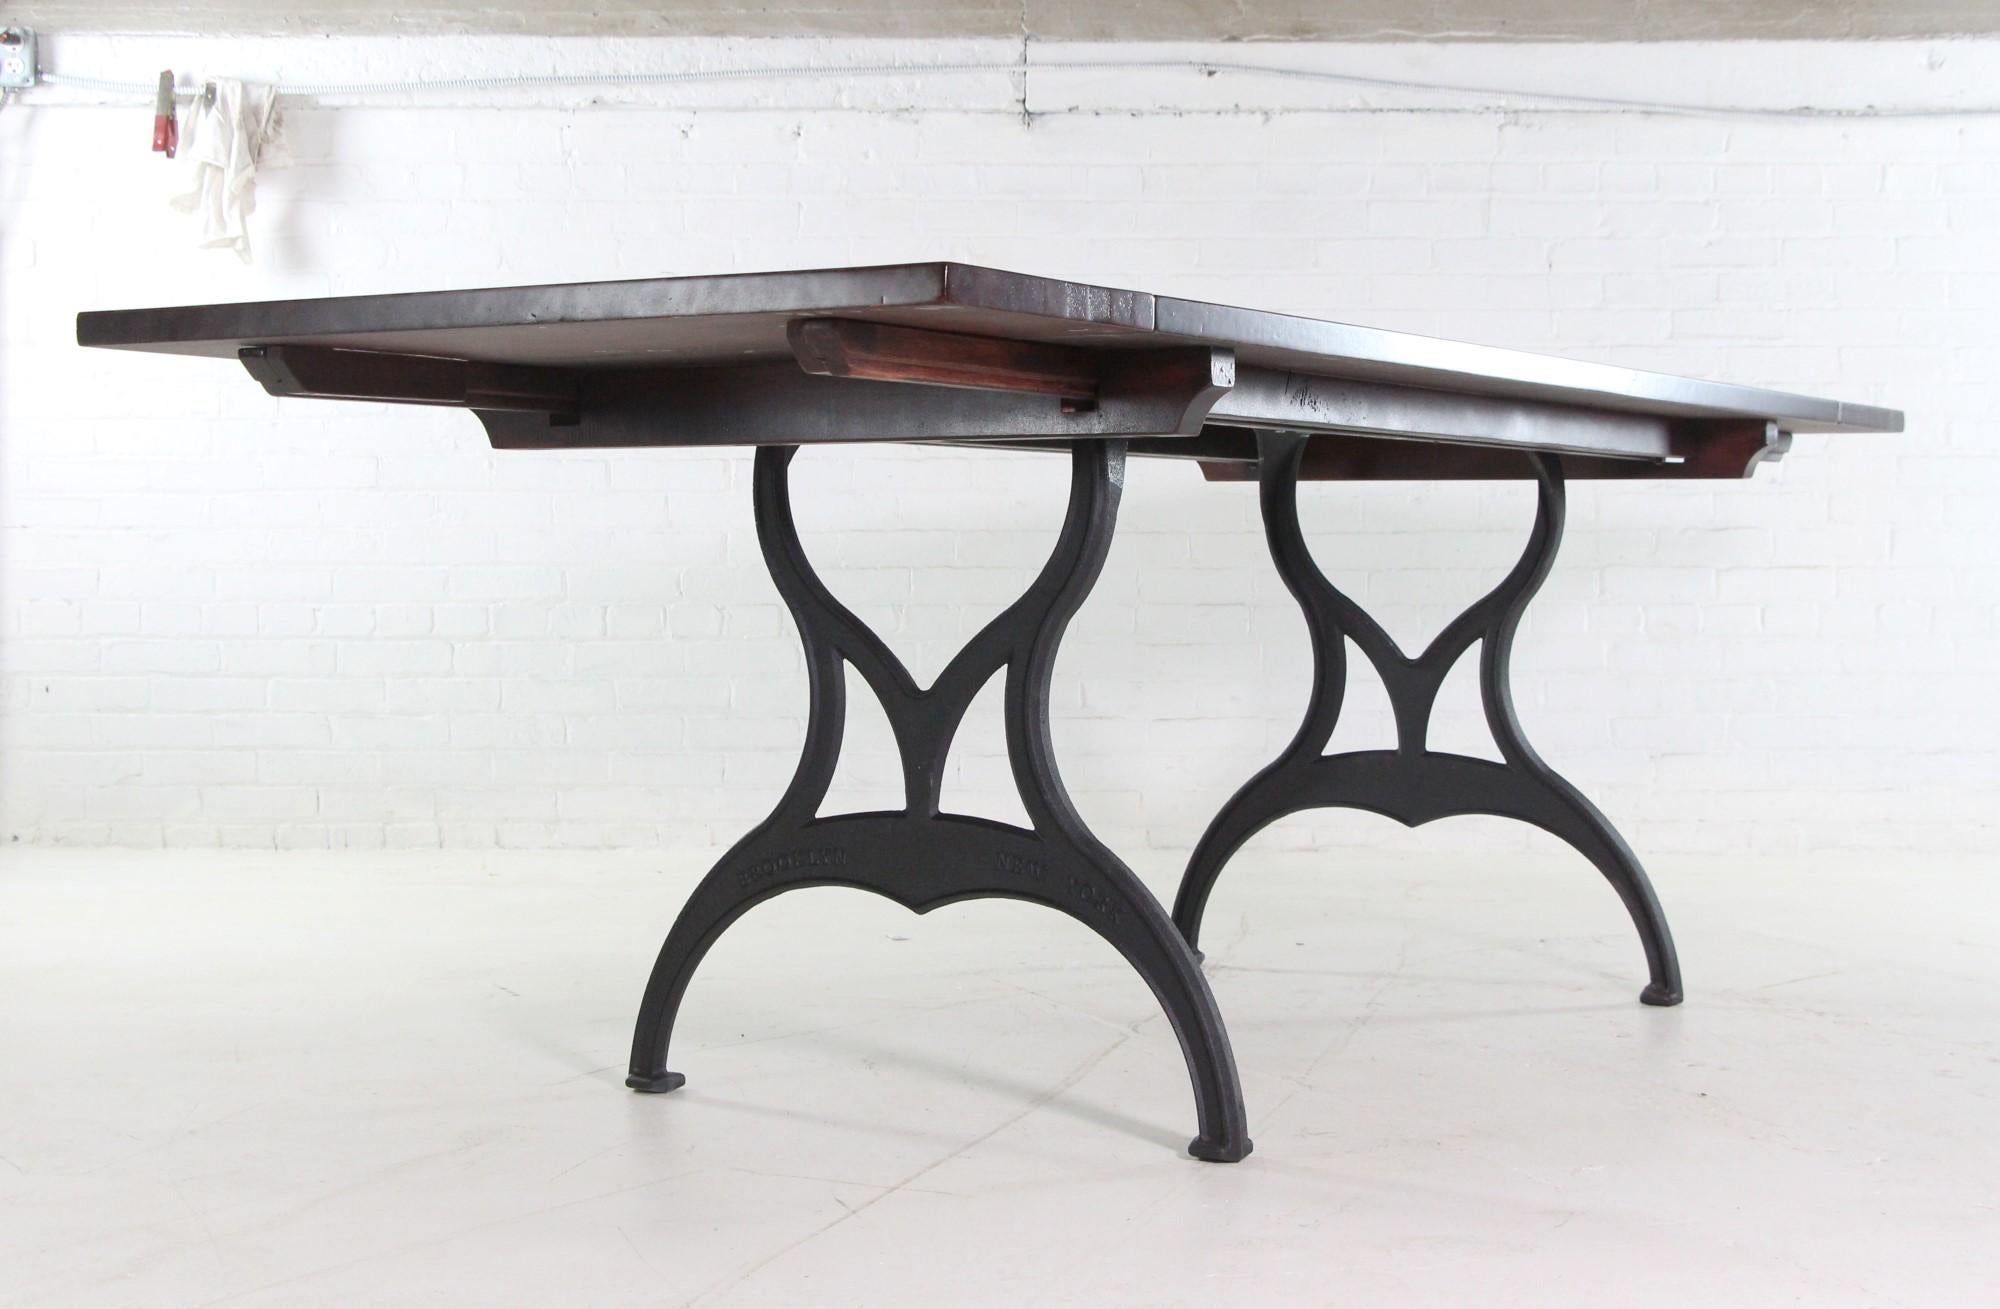 Industrial Red Mahogany Apitong Table w Extensions Cast Iron Legs Brooklyn, NY For Sale